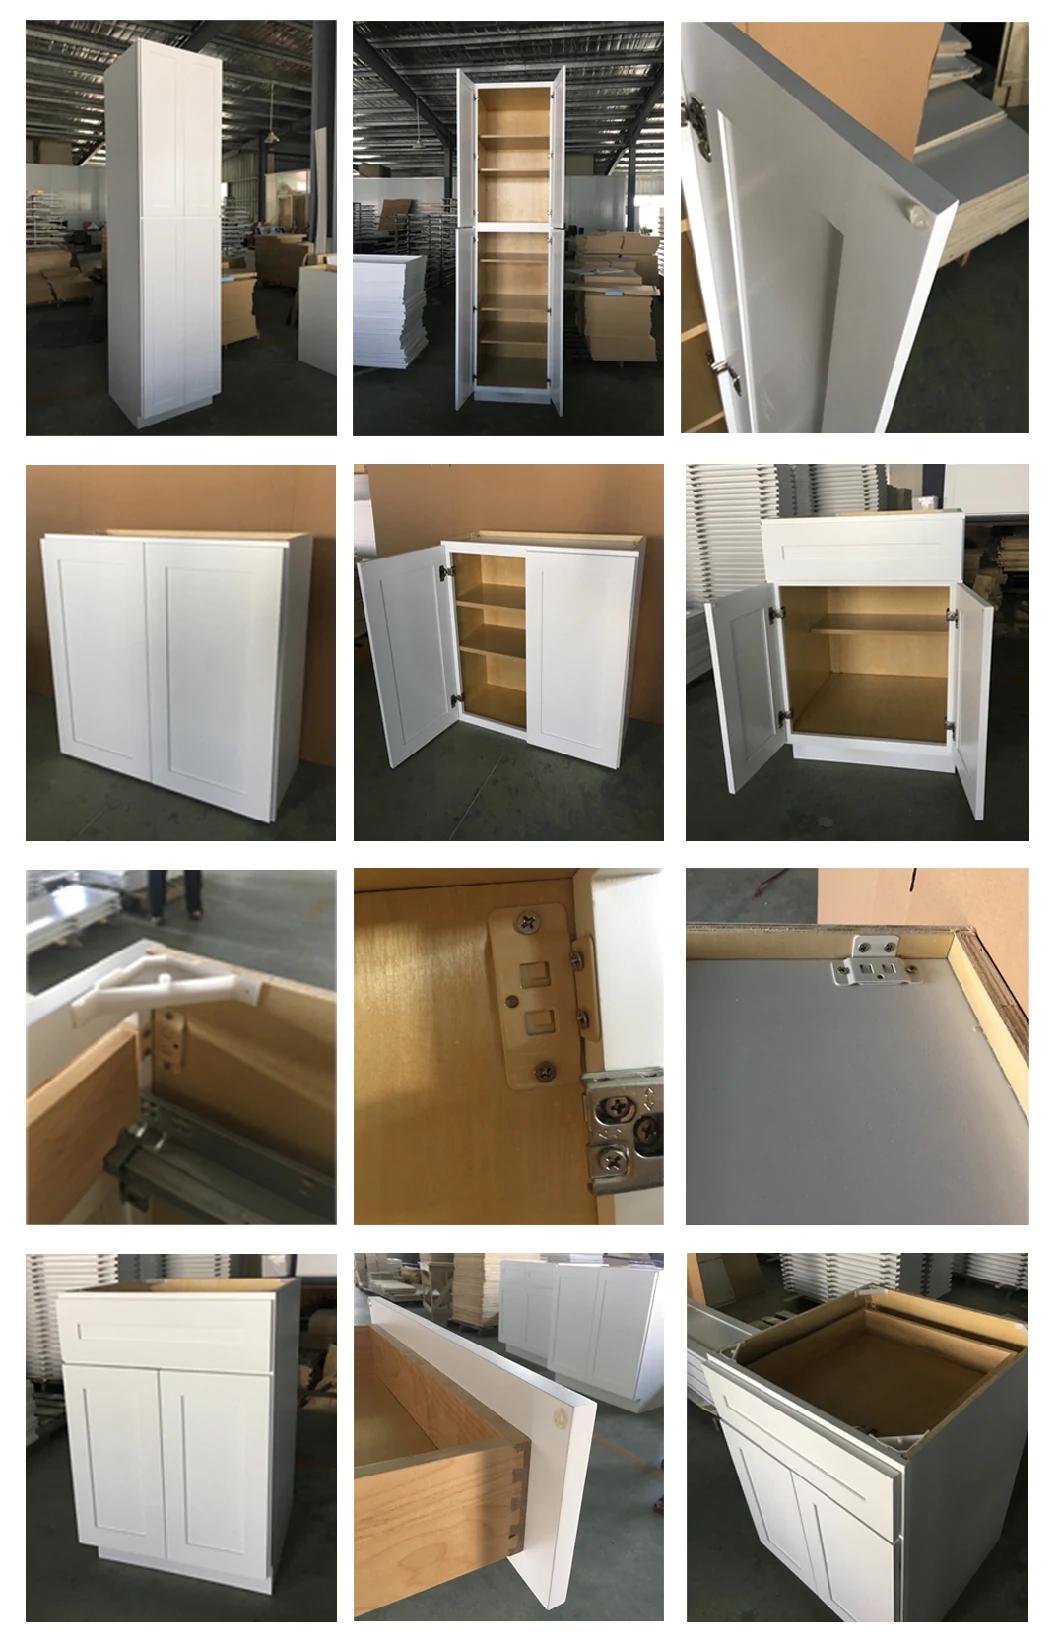 Plywood Linear Style Cabinext Kd (Flat-Packed) Customized Fuzhou China Chinese Furniture Cabinets